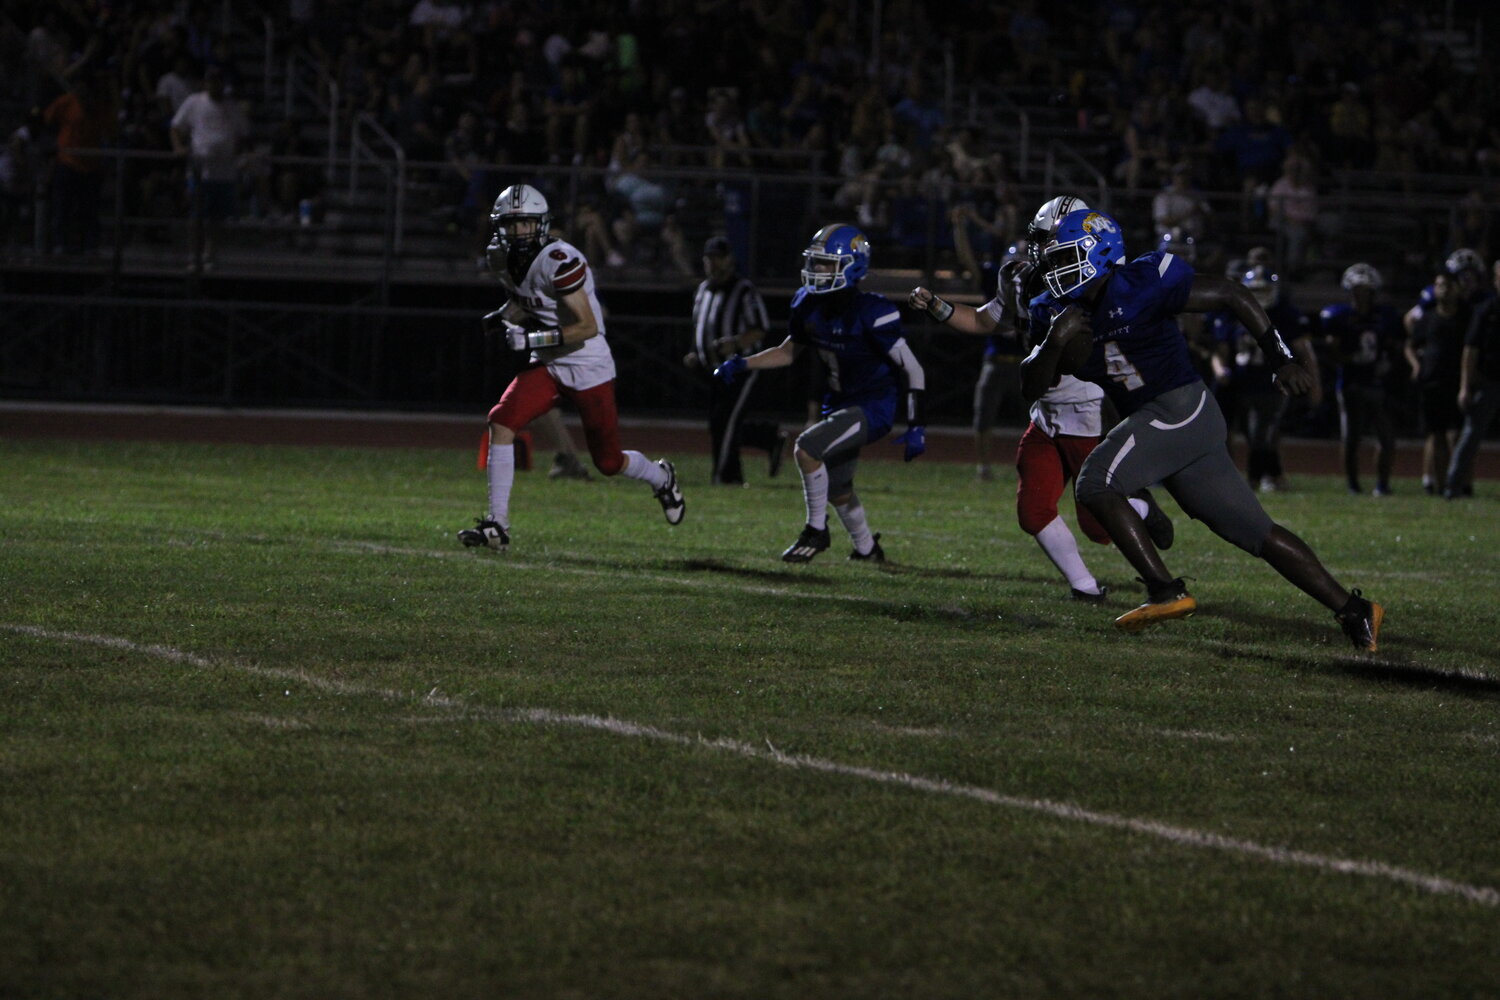 Carleon Jones runs the ball during the Wright City-Winfield game. He would take it in for a touchdown.